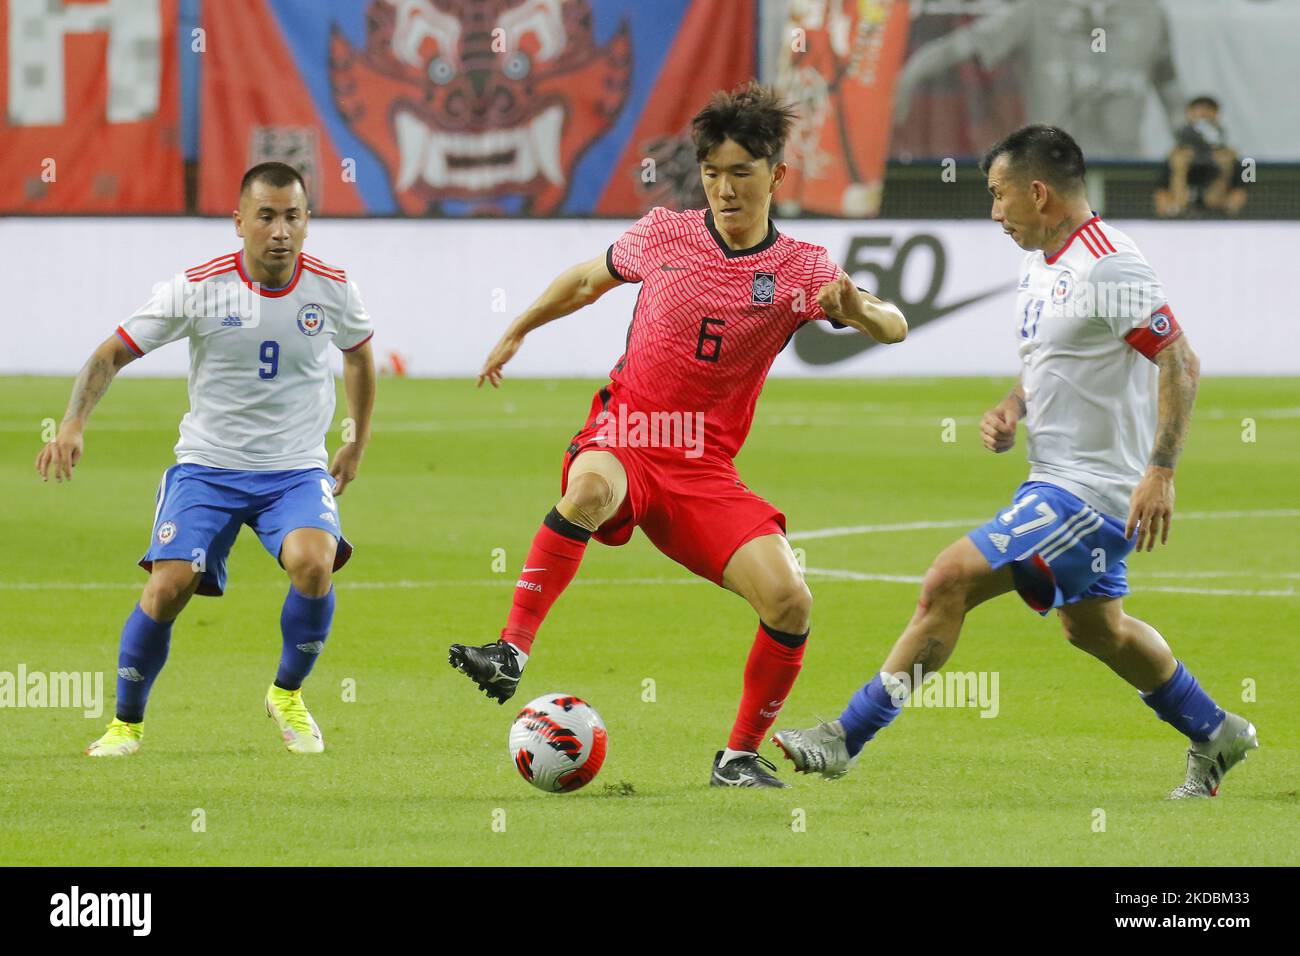 June 6, 2022-Daejeon, South Korea-Hwang, Inbeom of South Korea and Medel, Gary of Chile action during an International Friendly match between South Korea v Chile at Daejeon Worldcup Stadium in Daejeon, South Korea. (Photo by Seung-il Ryu/NurPhoto) Stock Photo